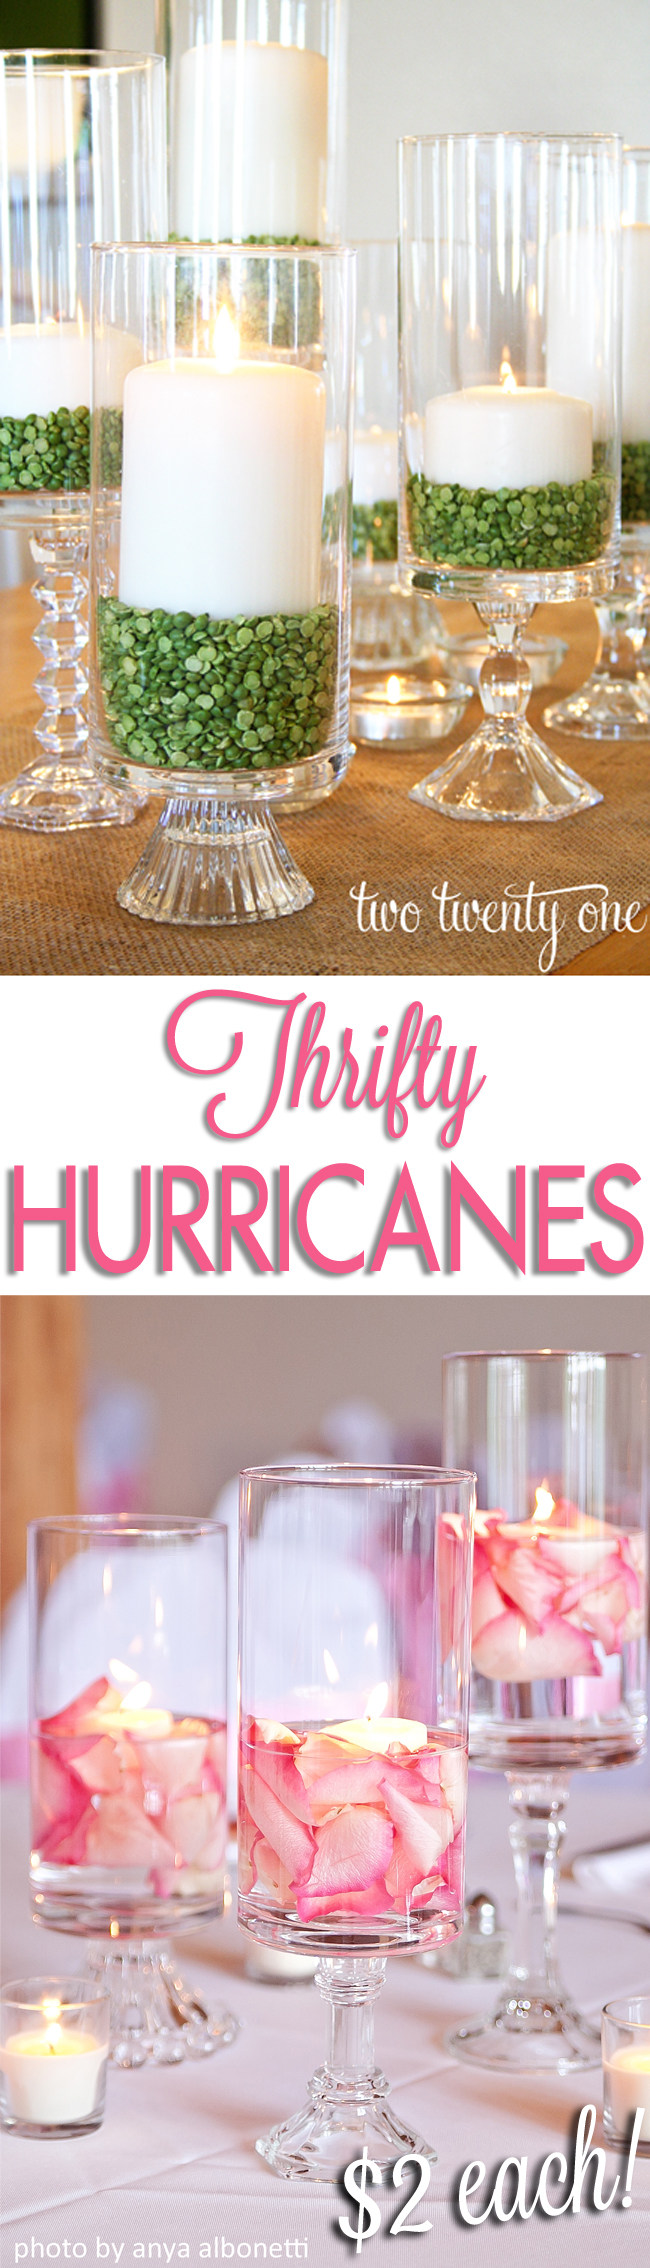 DIY Hurricane Centerpiece with Floating Candles